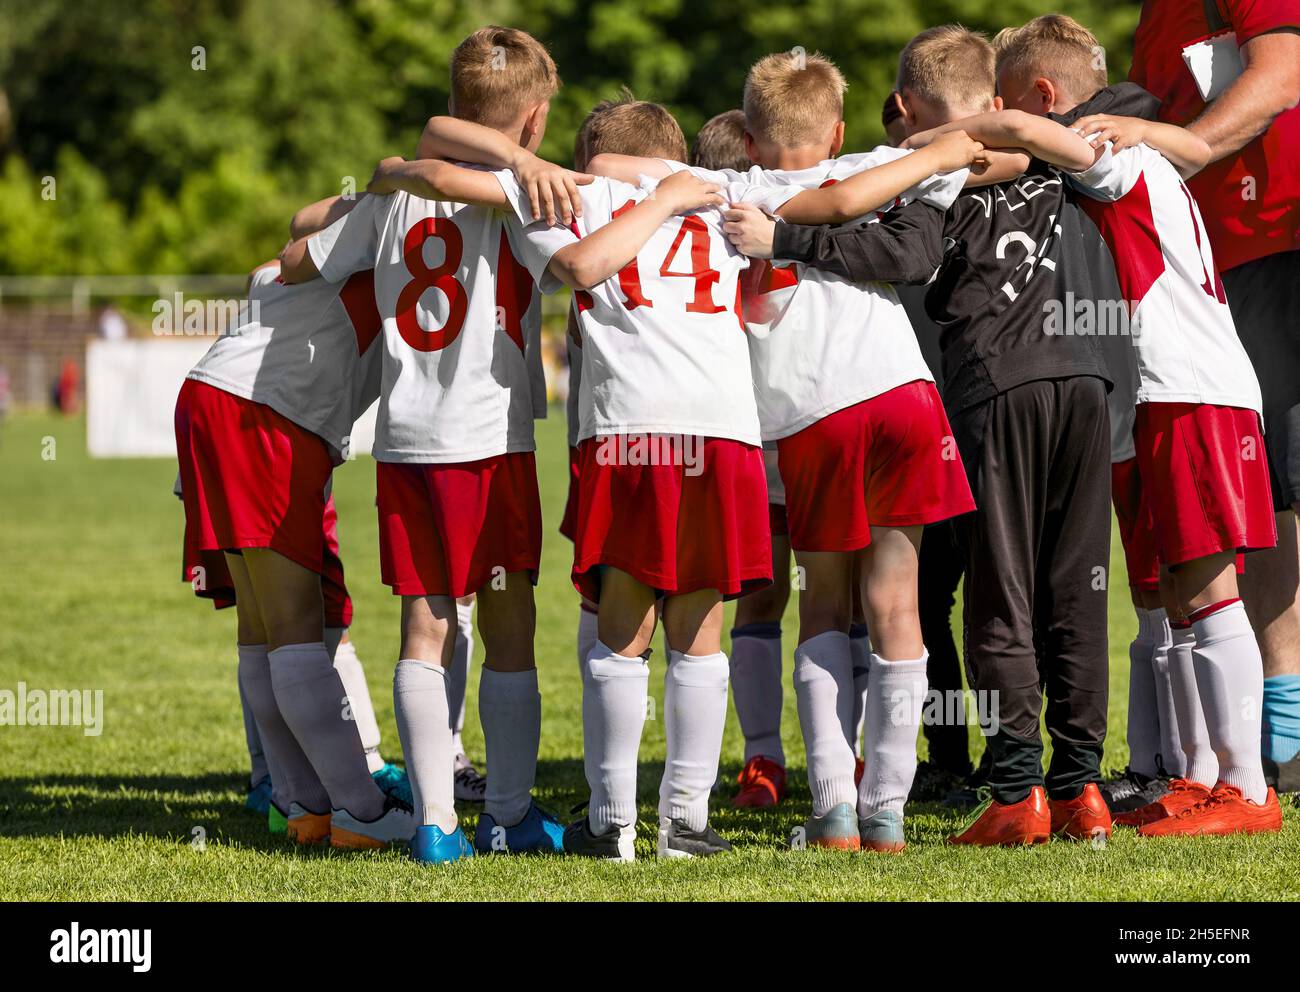 Children Team Sport. Kids Play Sports. Children Sports Team United Ready to Play Game. Football Coach With School Boys. Youth Sports For Children. Boy Stock Photo